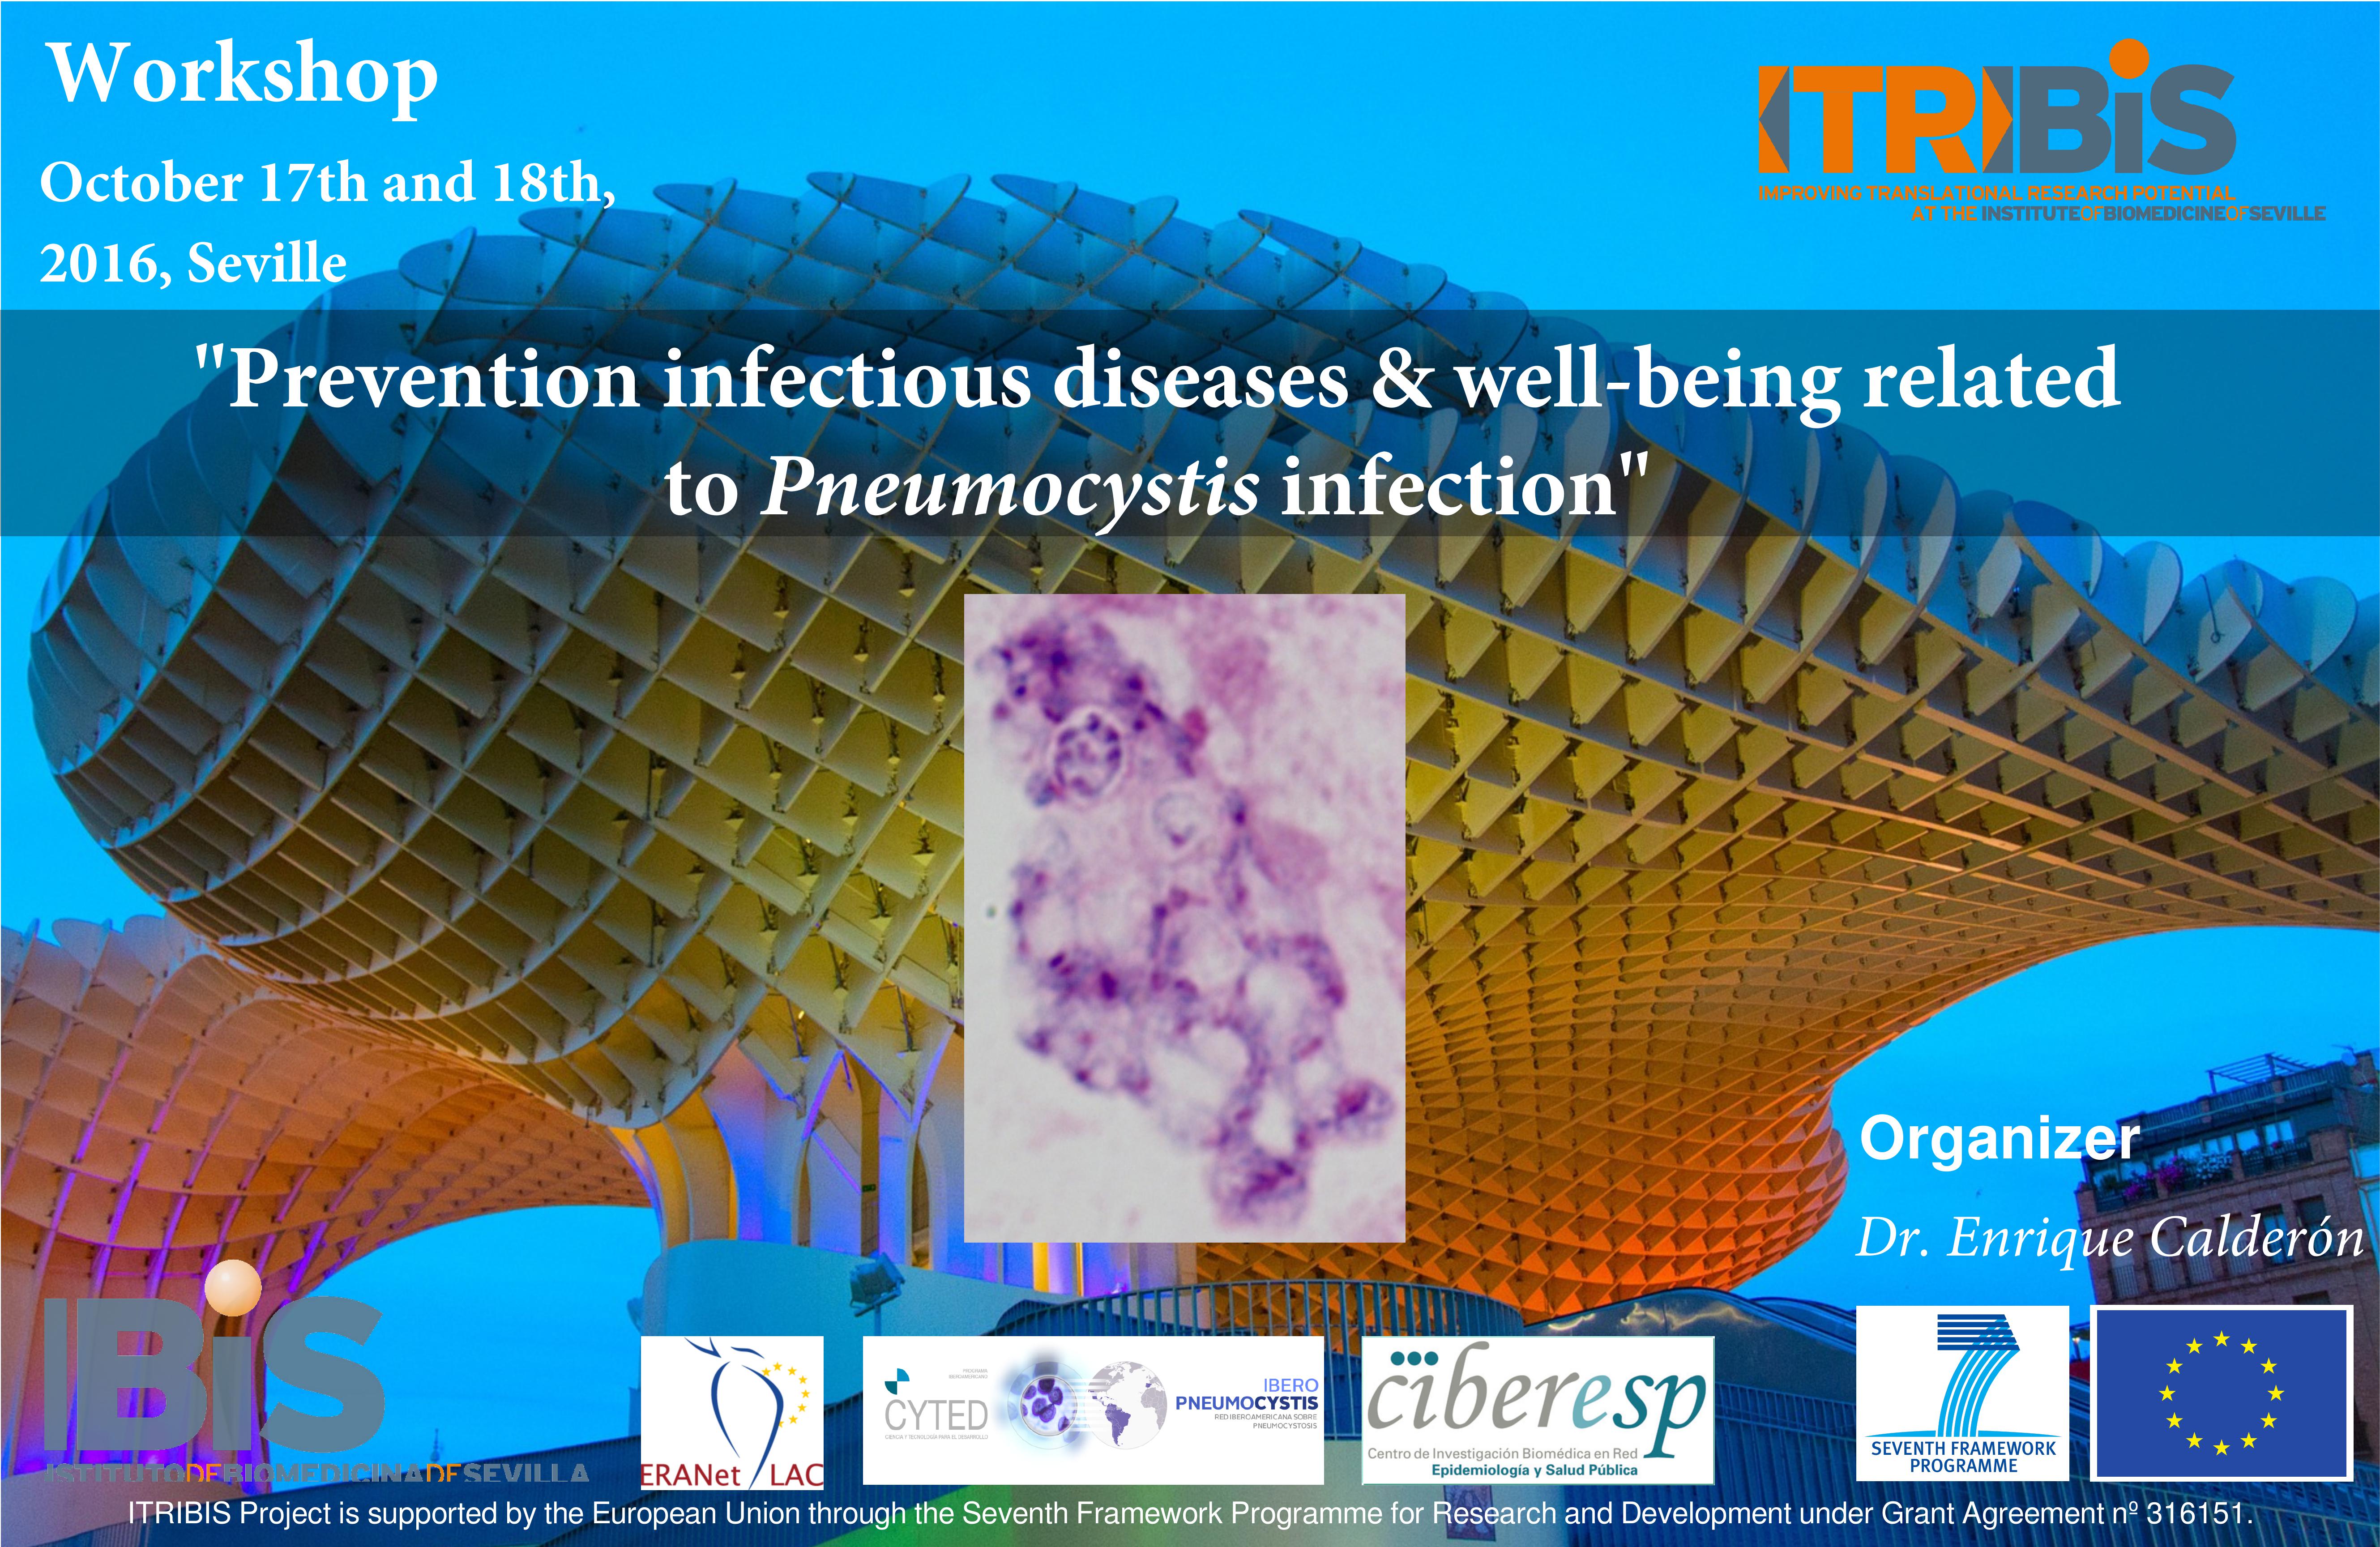 Poster: Prevention infectious diseases & well-being related to Pneumocystis infection